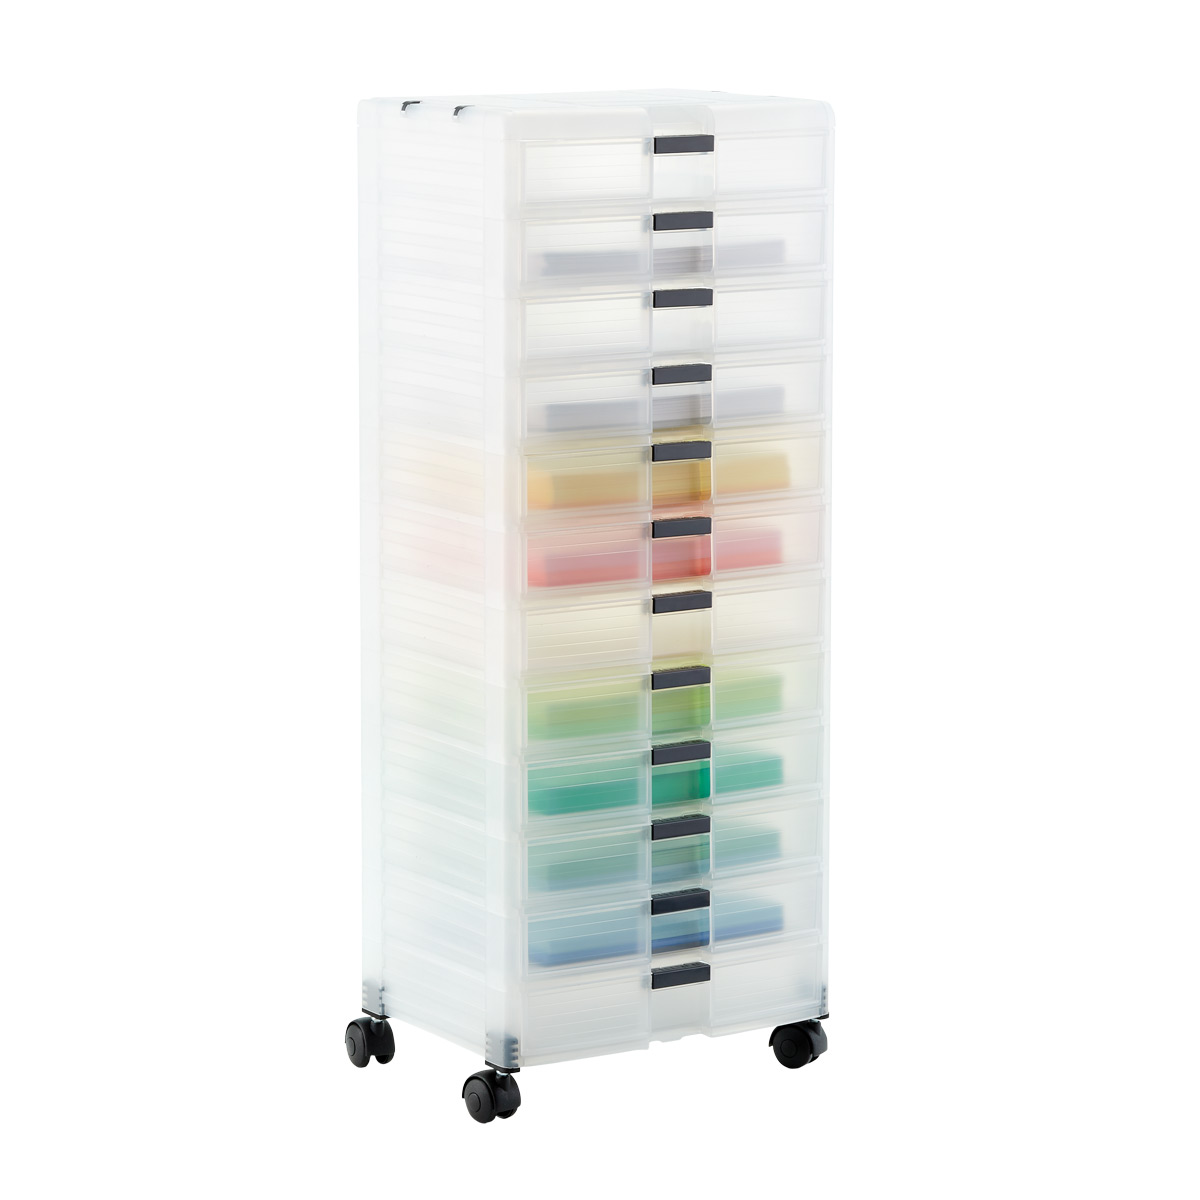 https://www.containerstore.com/catalogimages/358068/10076341-12-drawer-storage-chest-tra.jpg